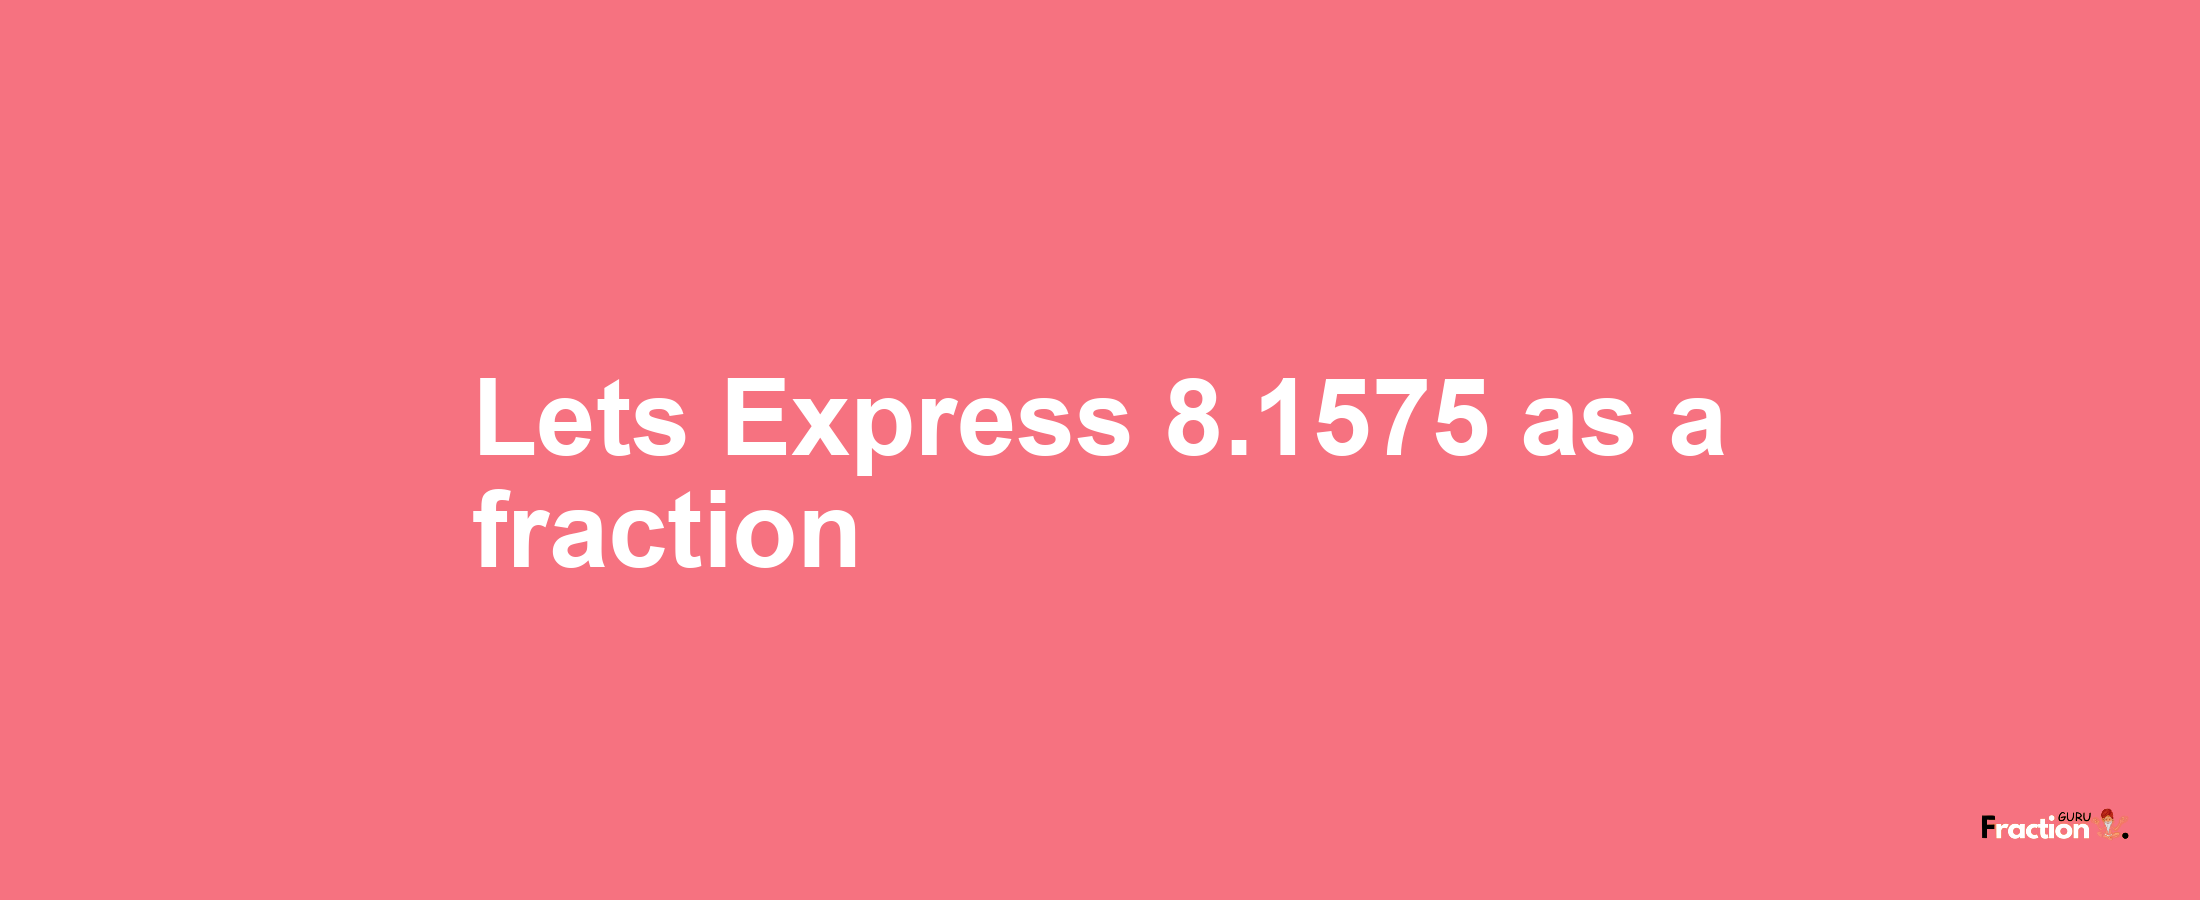 Lets Express 8.1575 as afraction